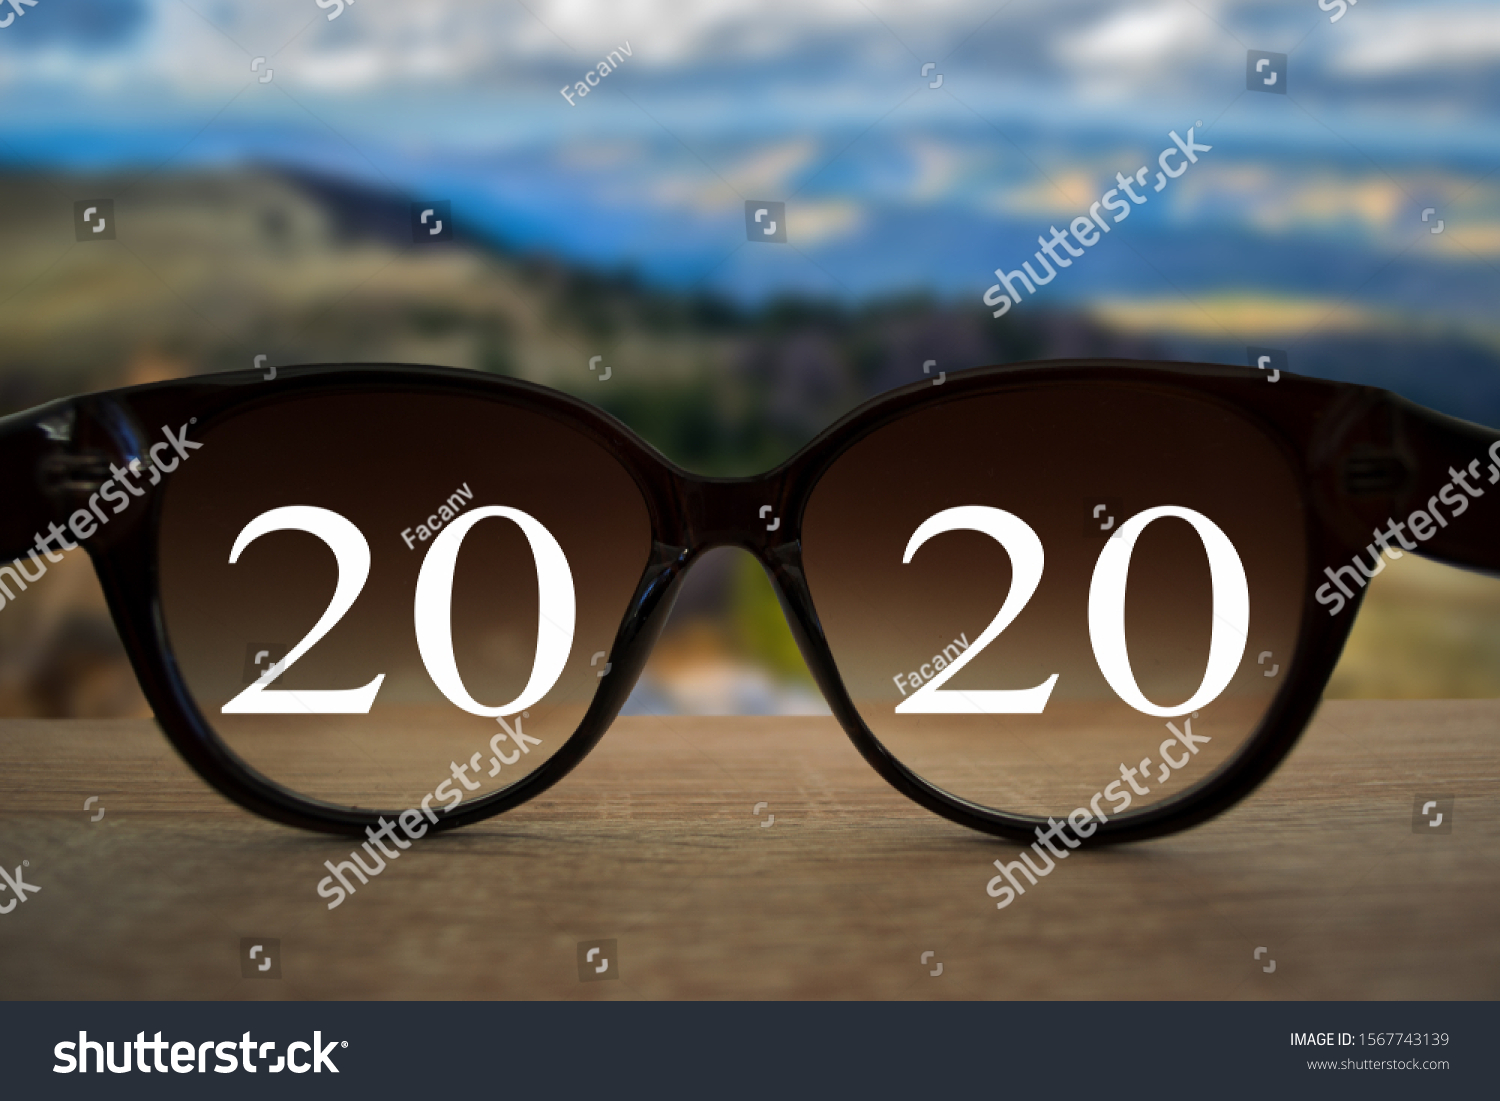 2020 white text with black eye glasses on wooden table over blur autumn landscapes. Business vision happy new year. #1567743139